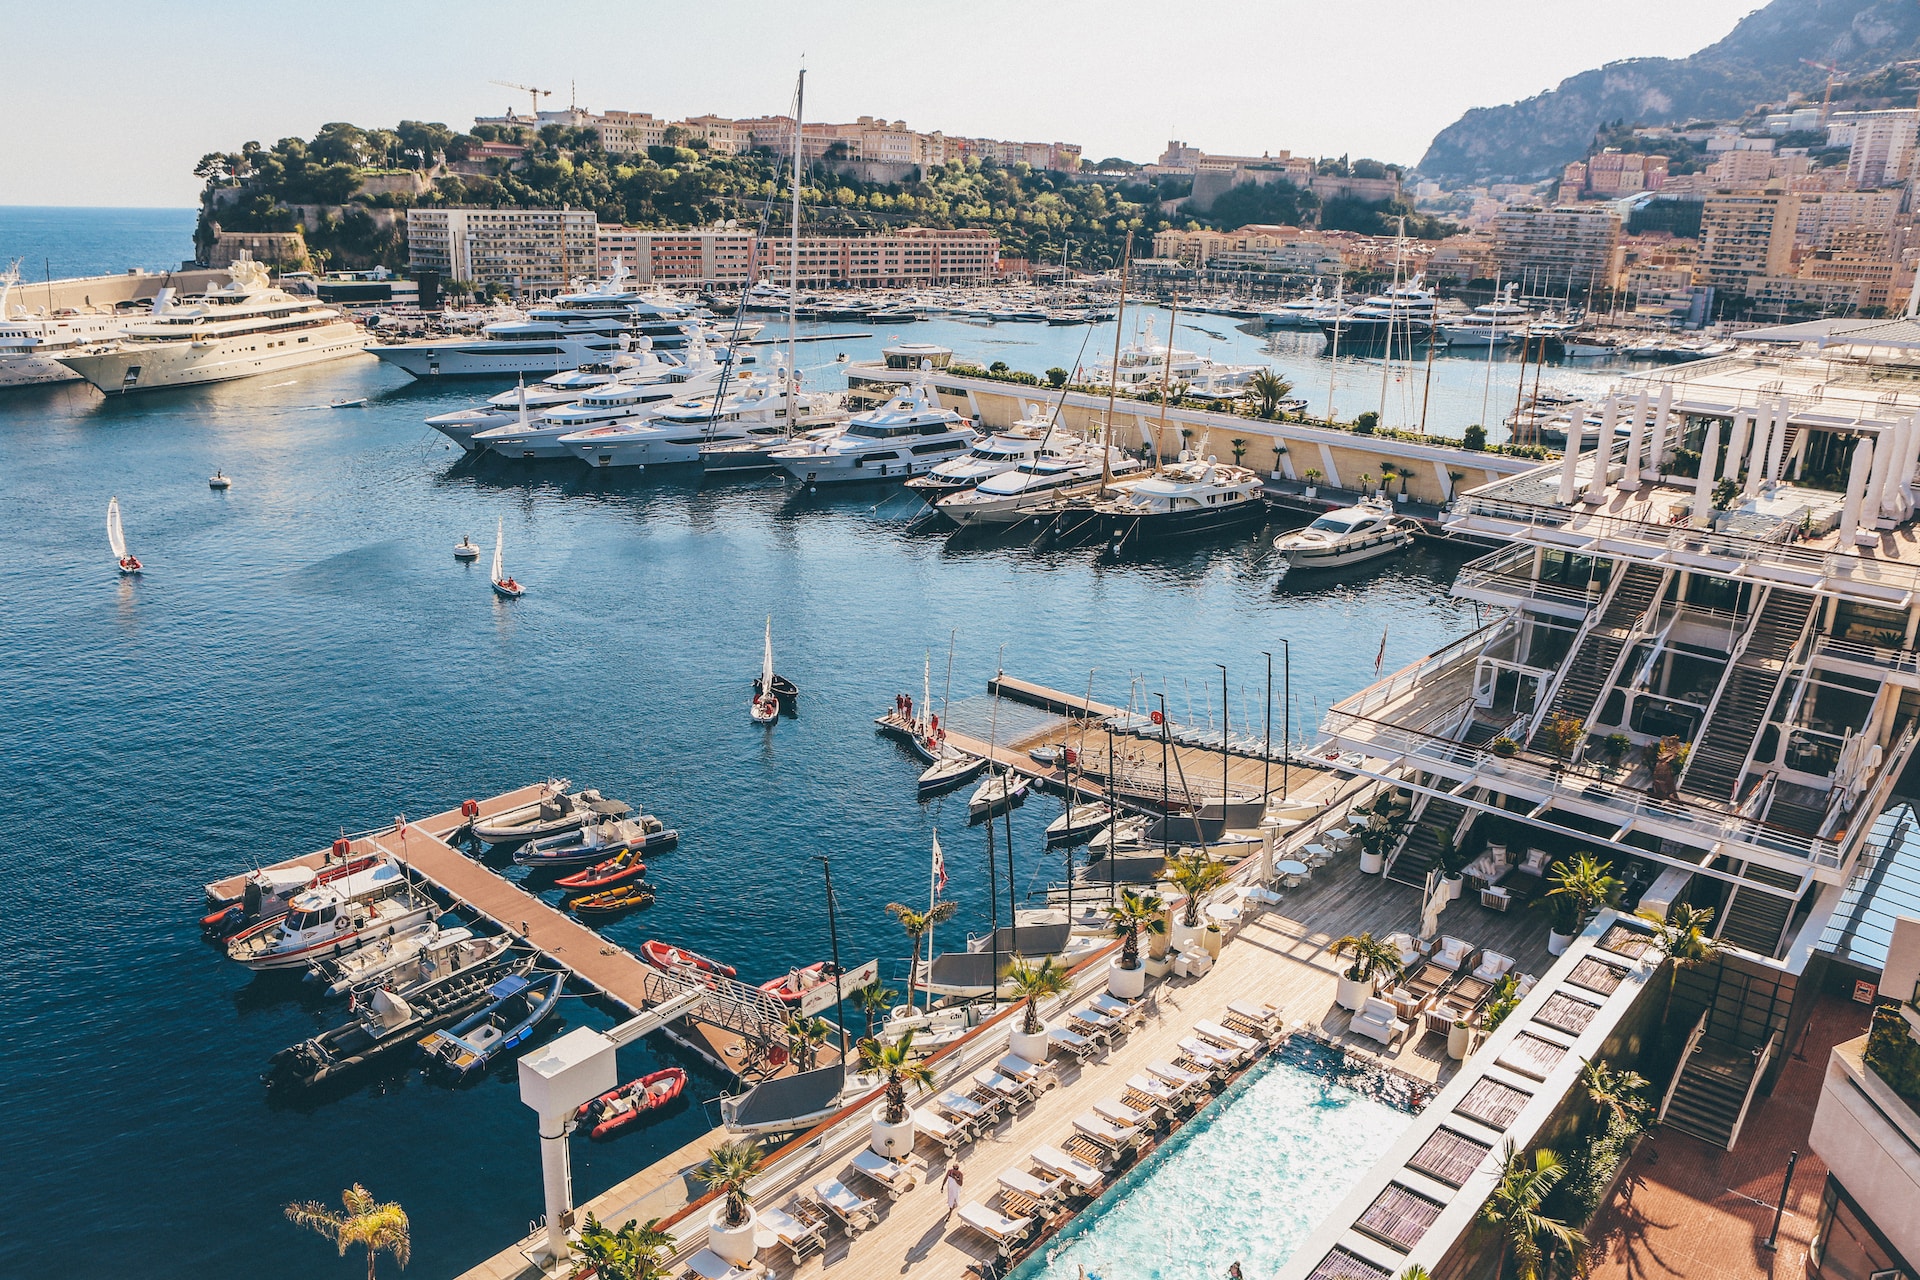 French Riviera harbor aerial view of boats and docks